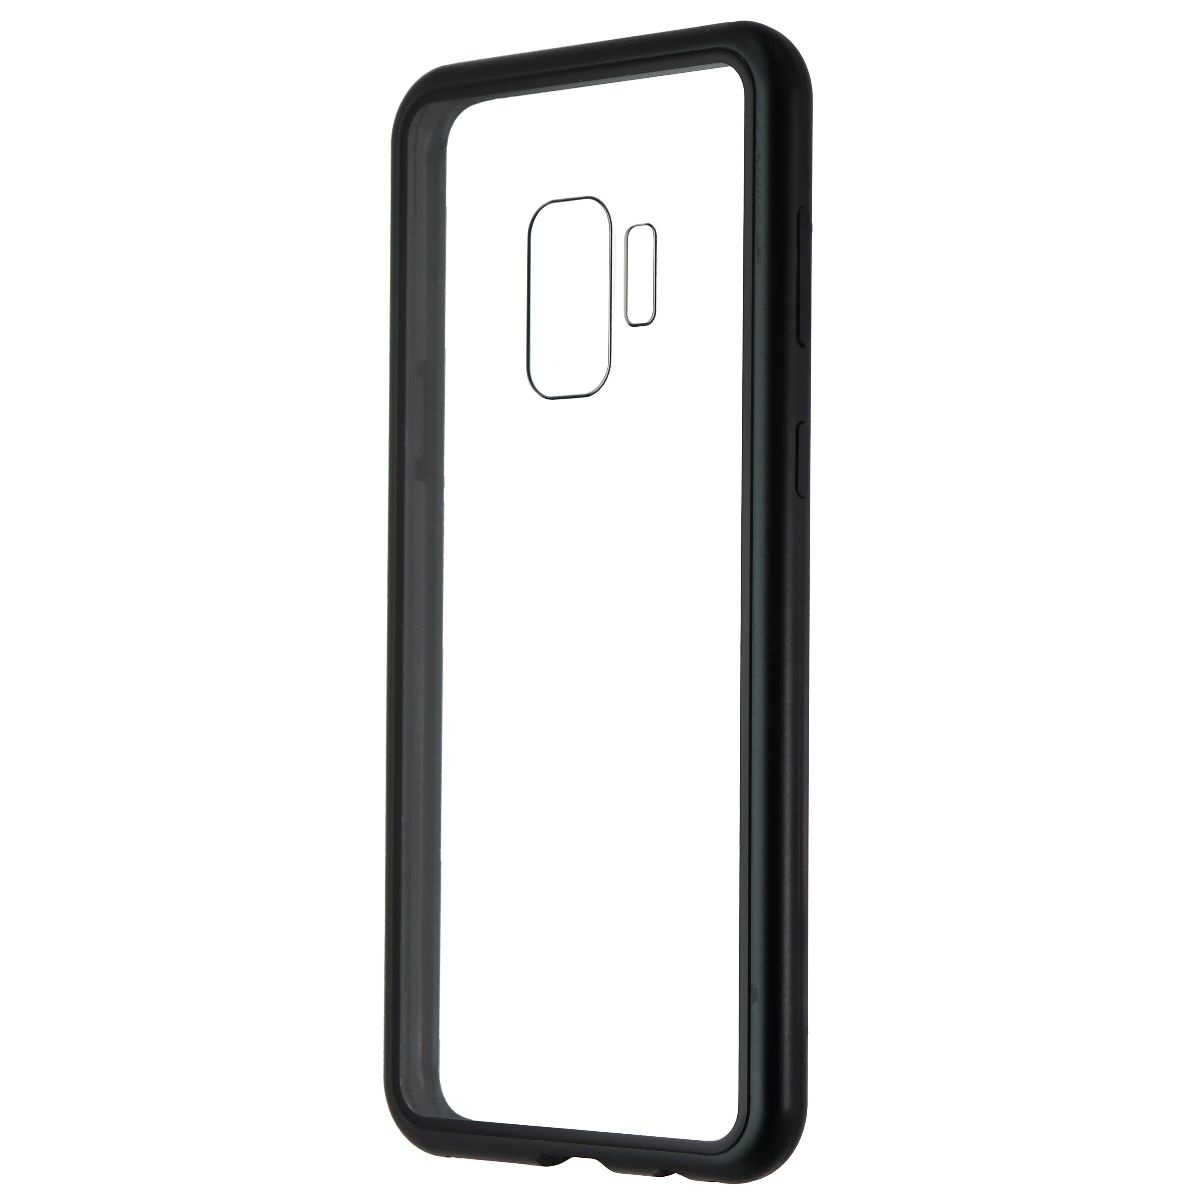 Zore Hybrid Glass Series Case For Samsung Galaxy S9 - Clear/Black